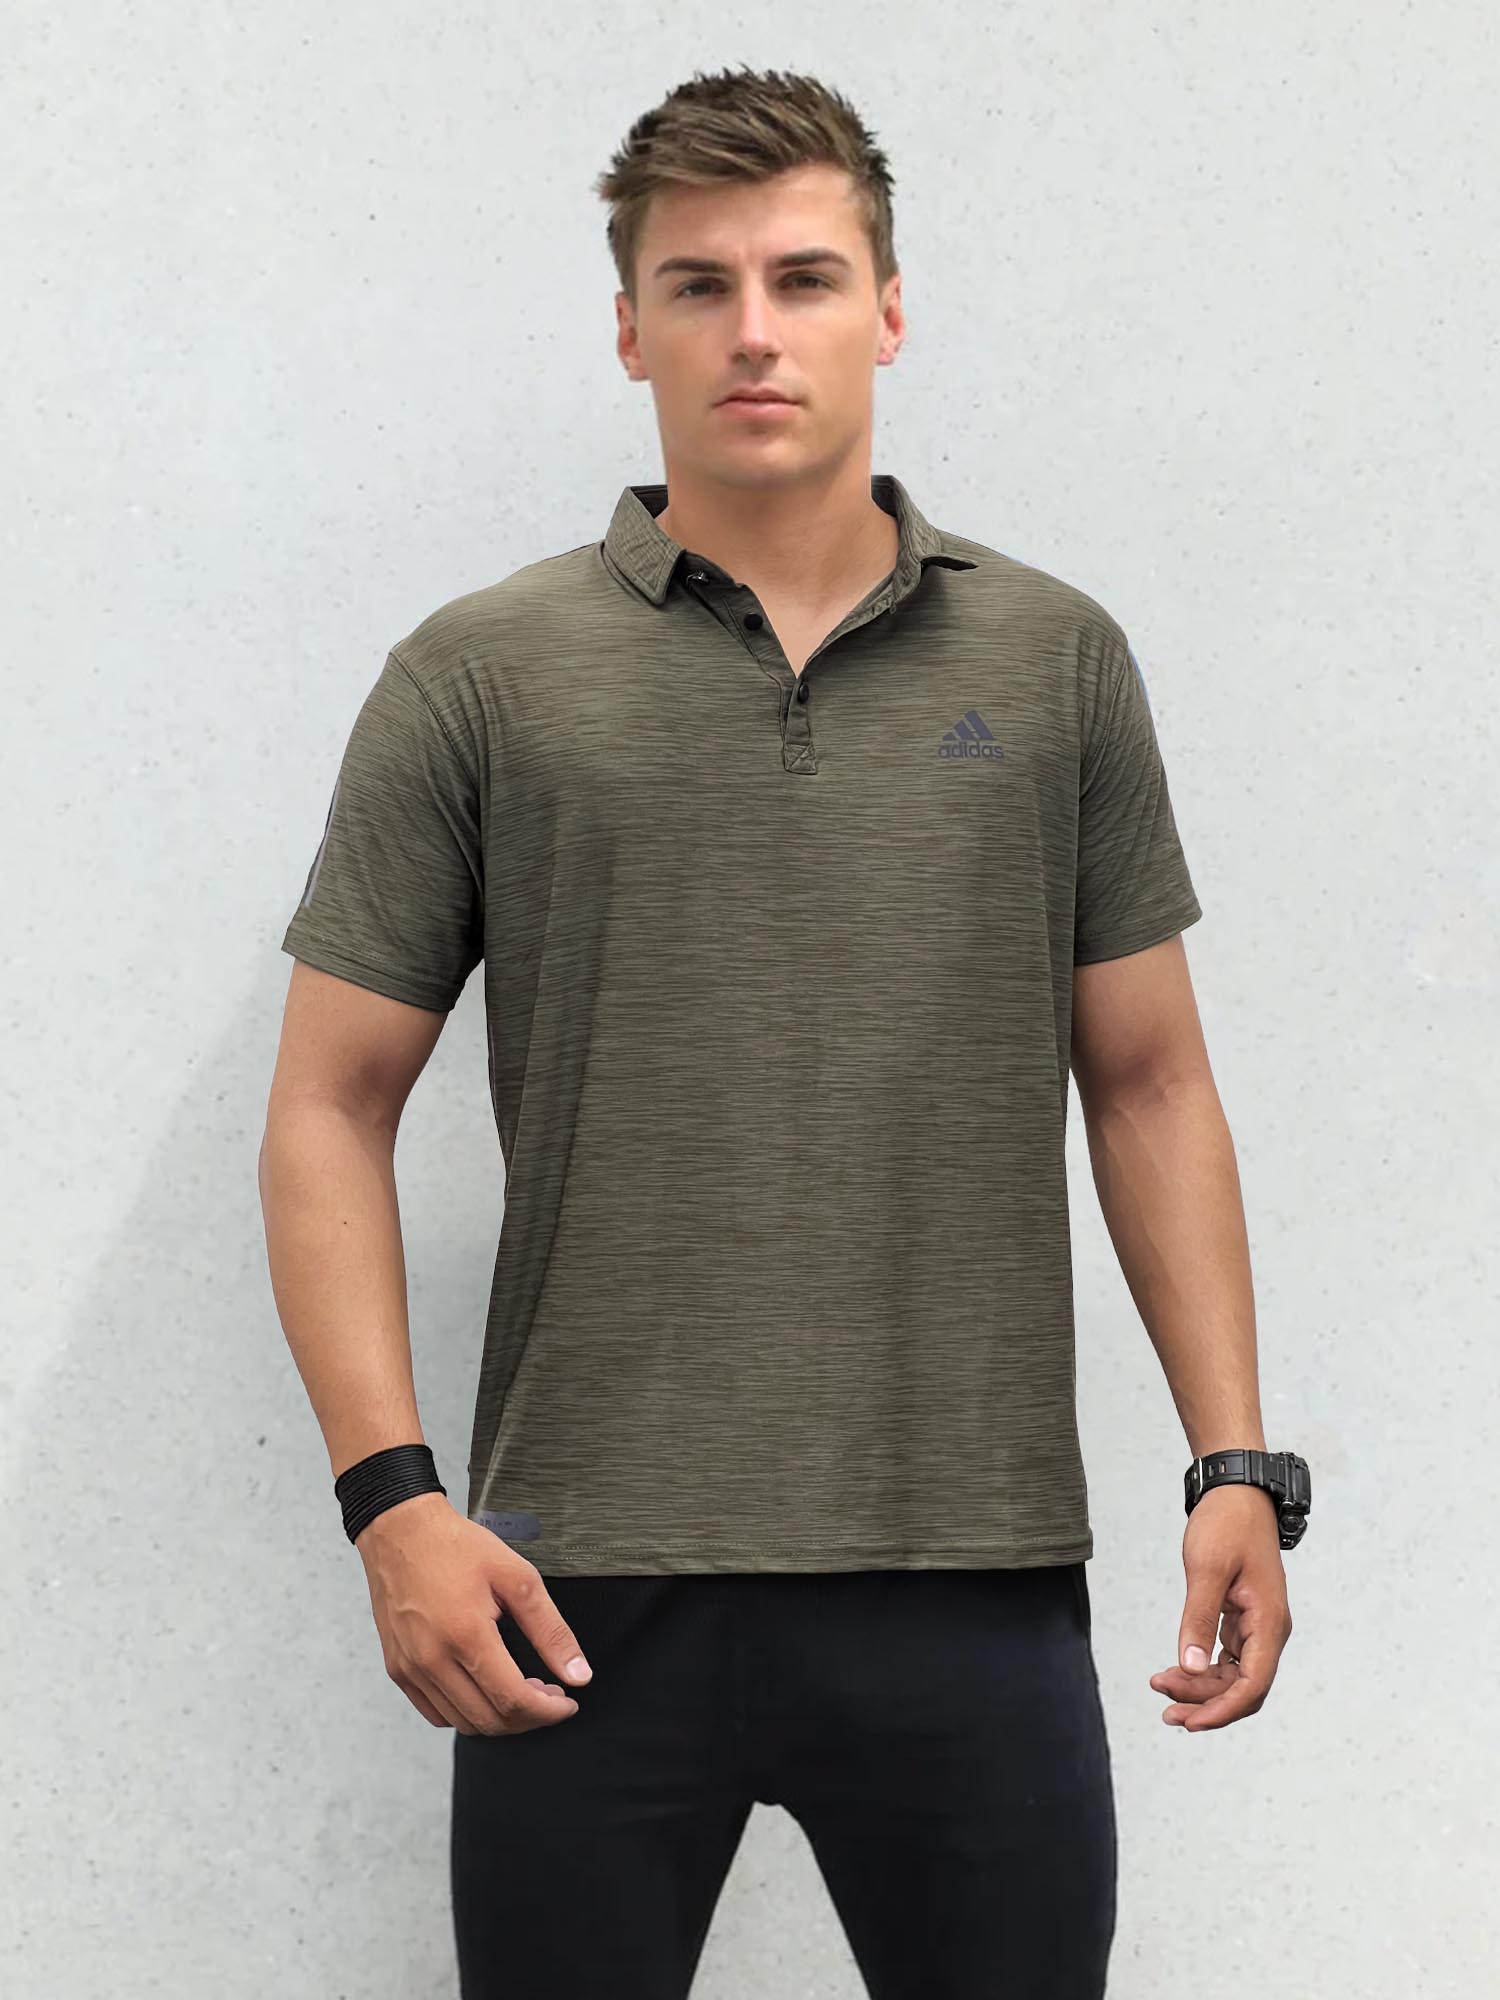 Imported Dry Fit Polo With Reflector Logo In Camo Green